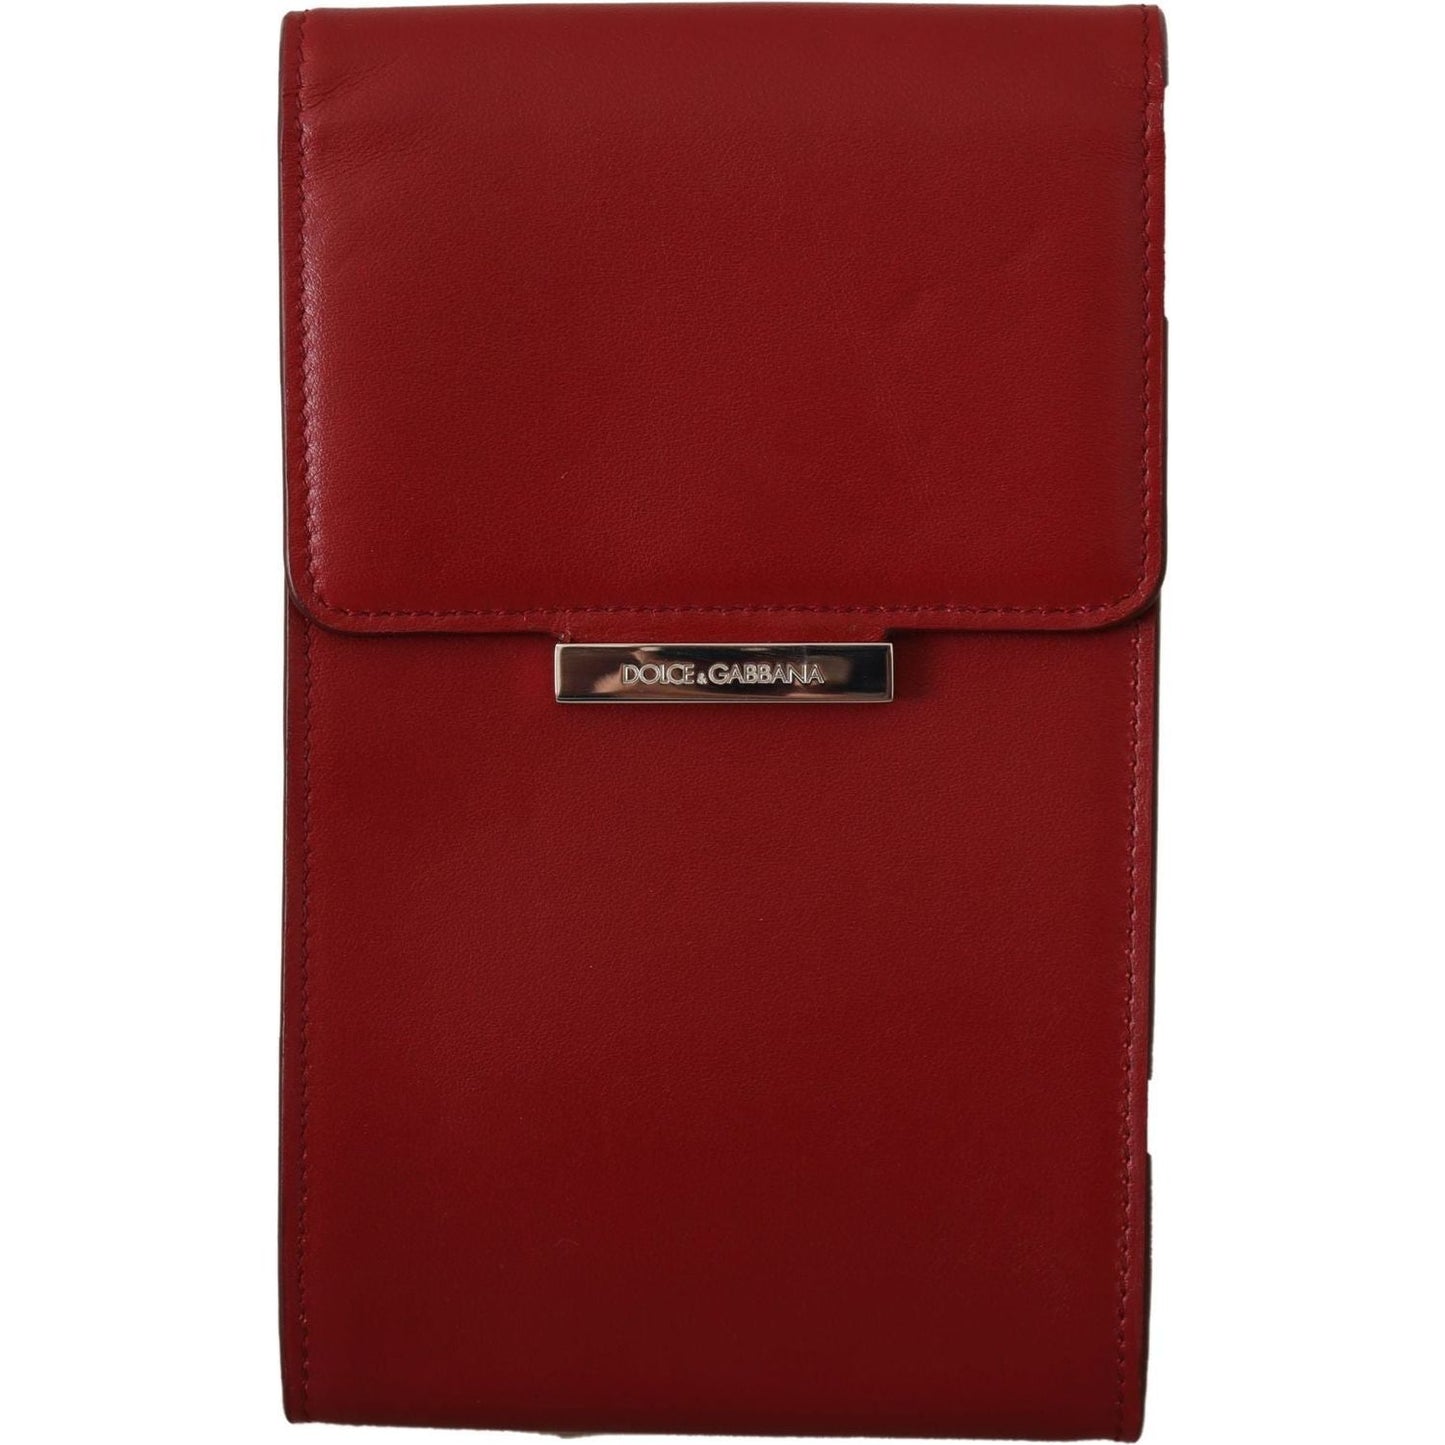 Dolce & Gabbana Red Leather Universal Phone Pocket Case red-leather-wallet-keyring-pouch-slot-pocket-wallet